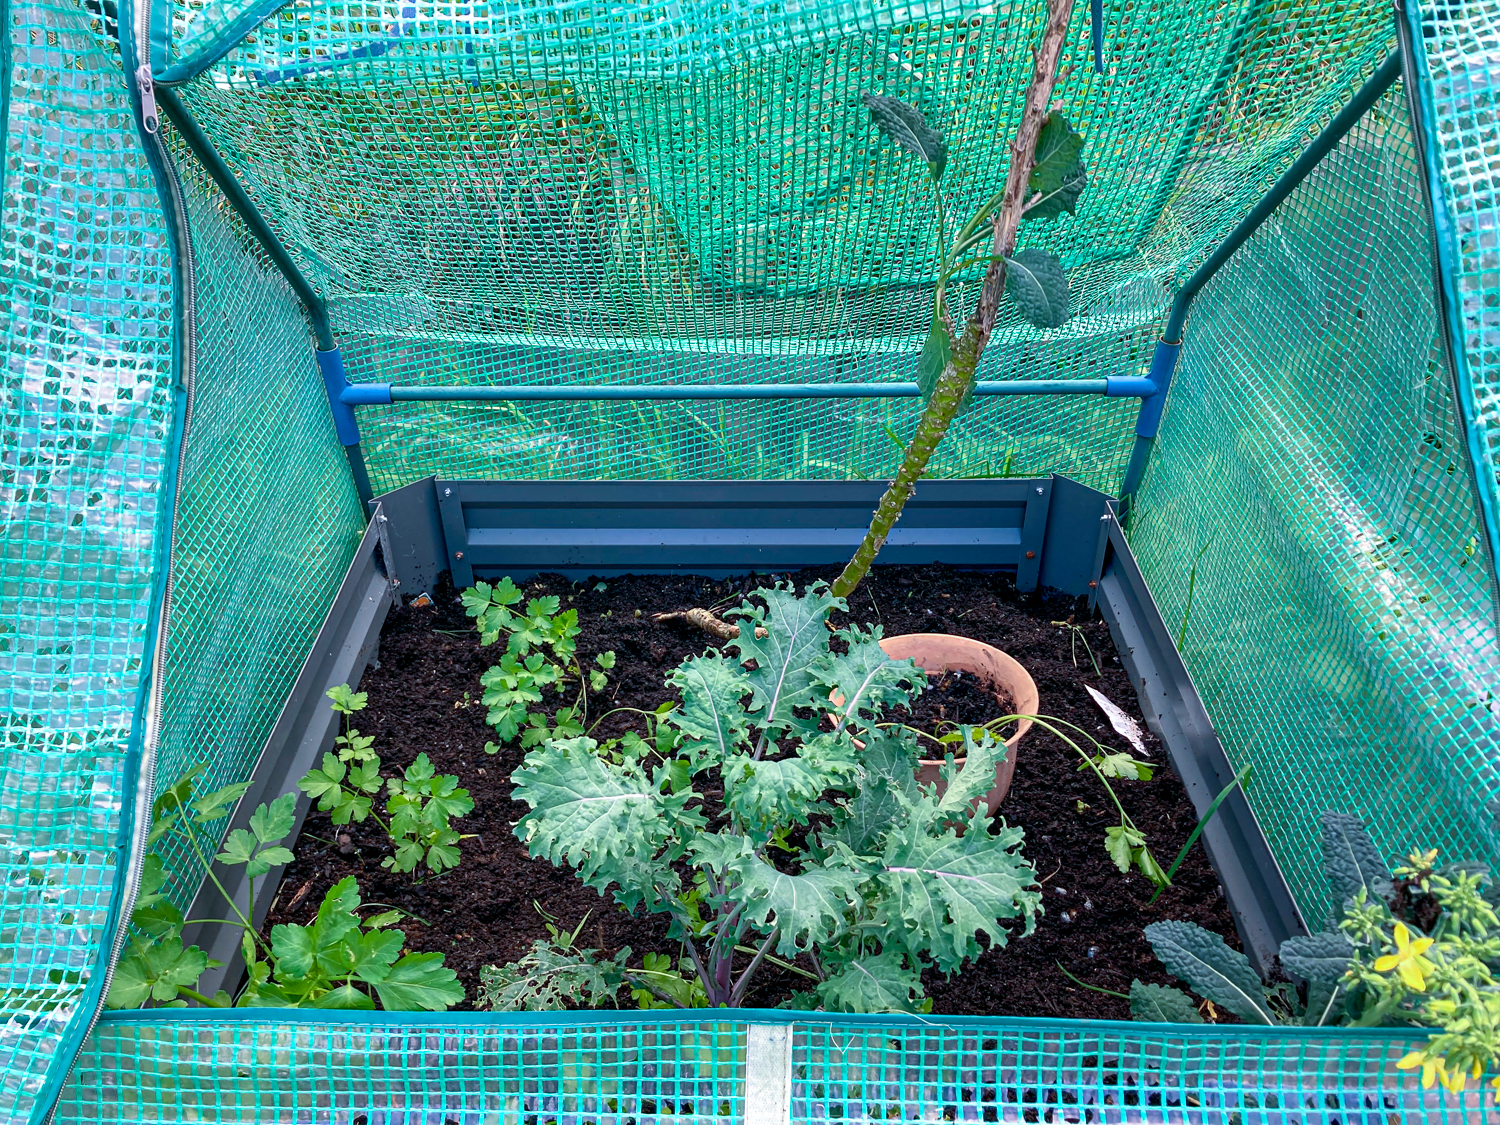 A weeded vegetable bed with parsley and two different types of kale